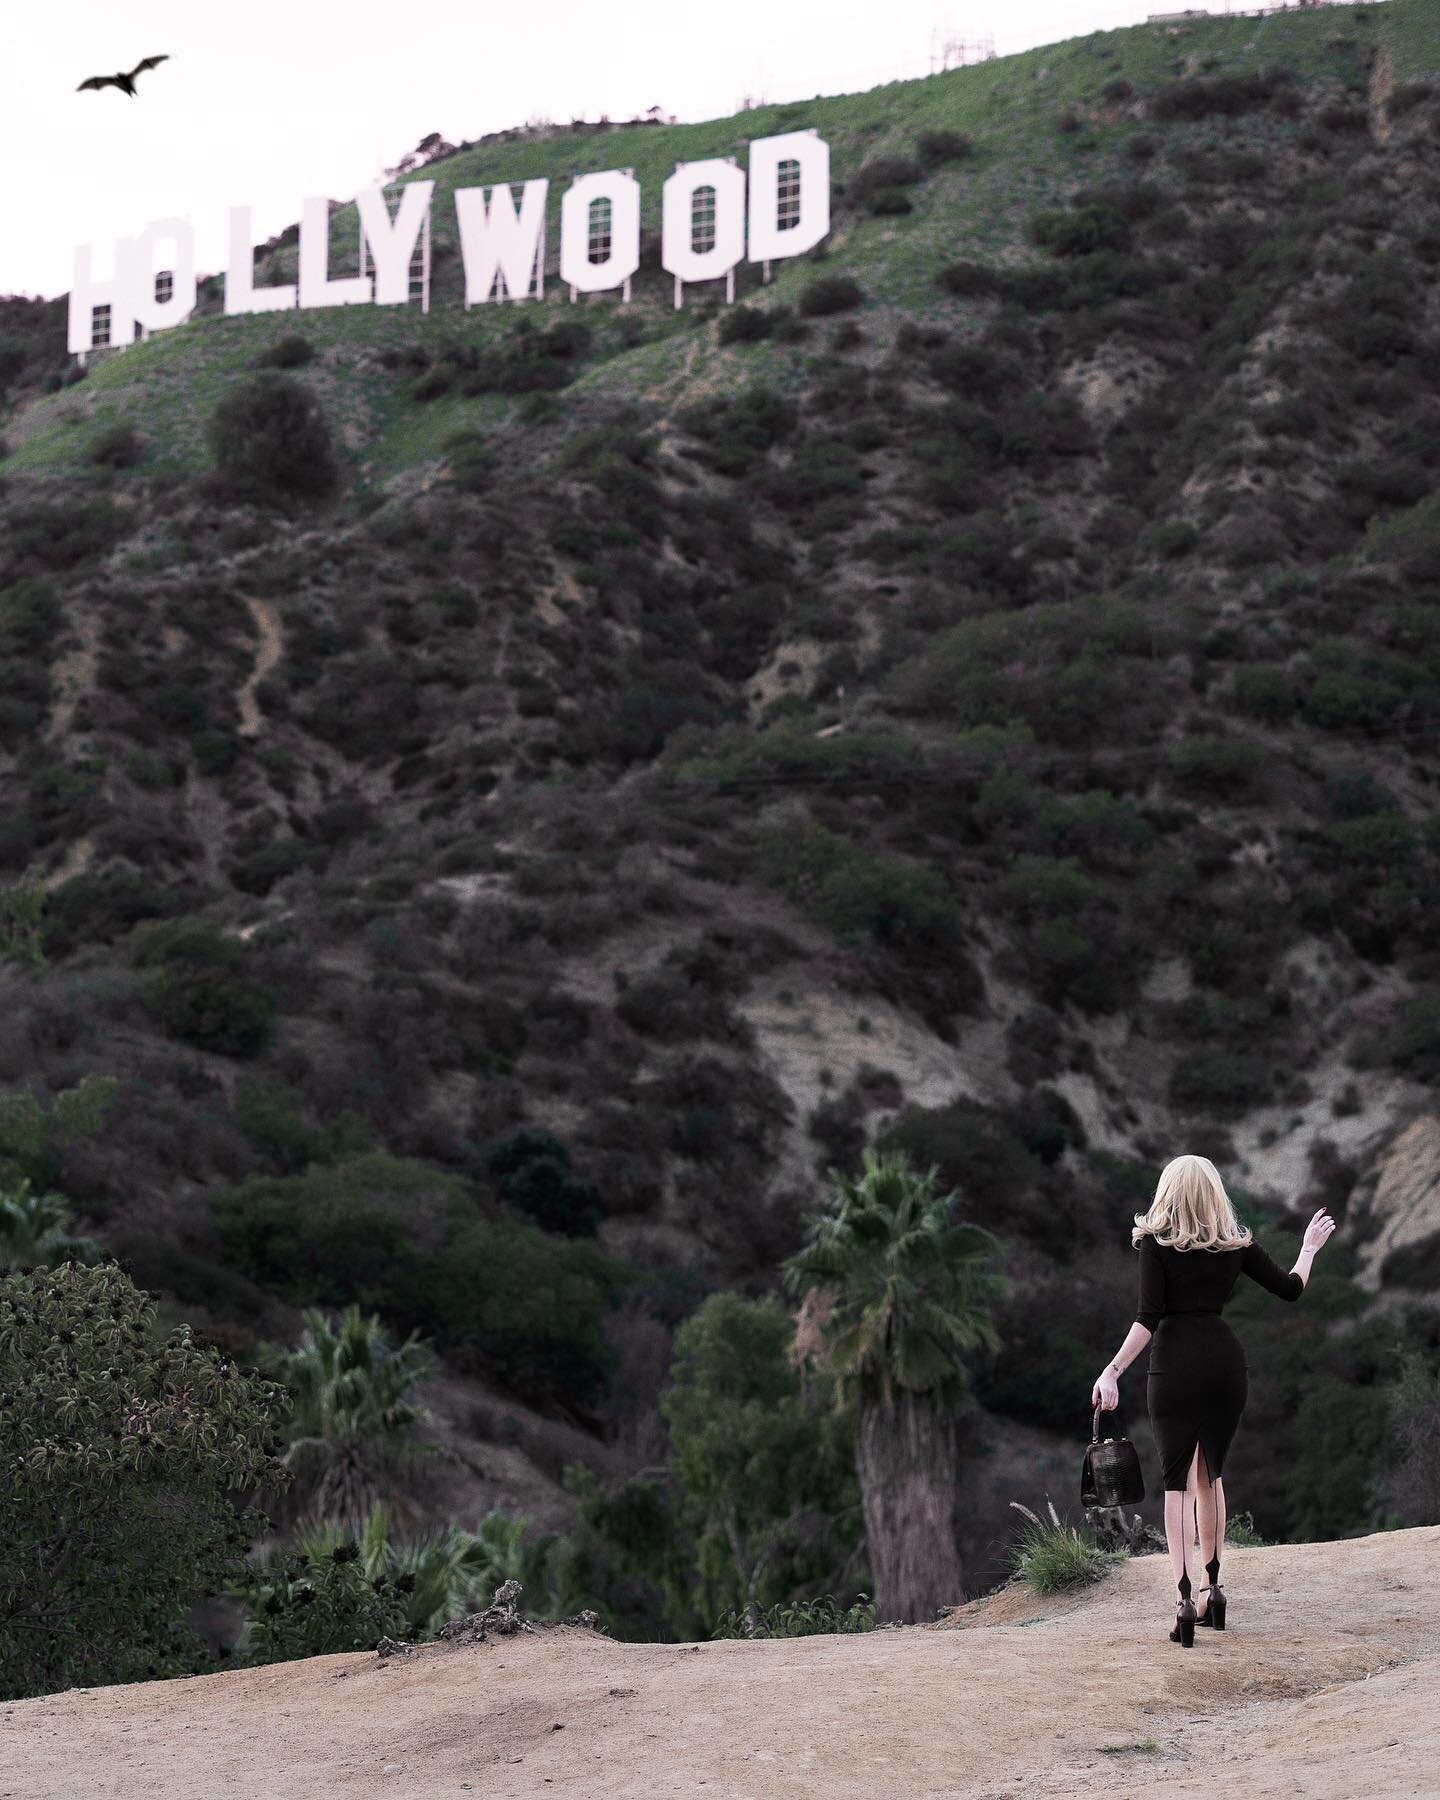 take me to the hollywood dream factory🦇 ⁣⁣
⁣
shot by @dinersiren⁣⁣
⁣⁣
⁣⁣
⁣⁣
⁣⁣
⁣⁣
⁣⁣
#hollywood #dreamers #hitchcock #thebirds #hollywoodsign #hitchcockblonde #bats #tippihedren #femmefatale #hollywoodnightmare